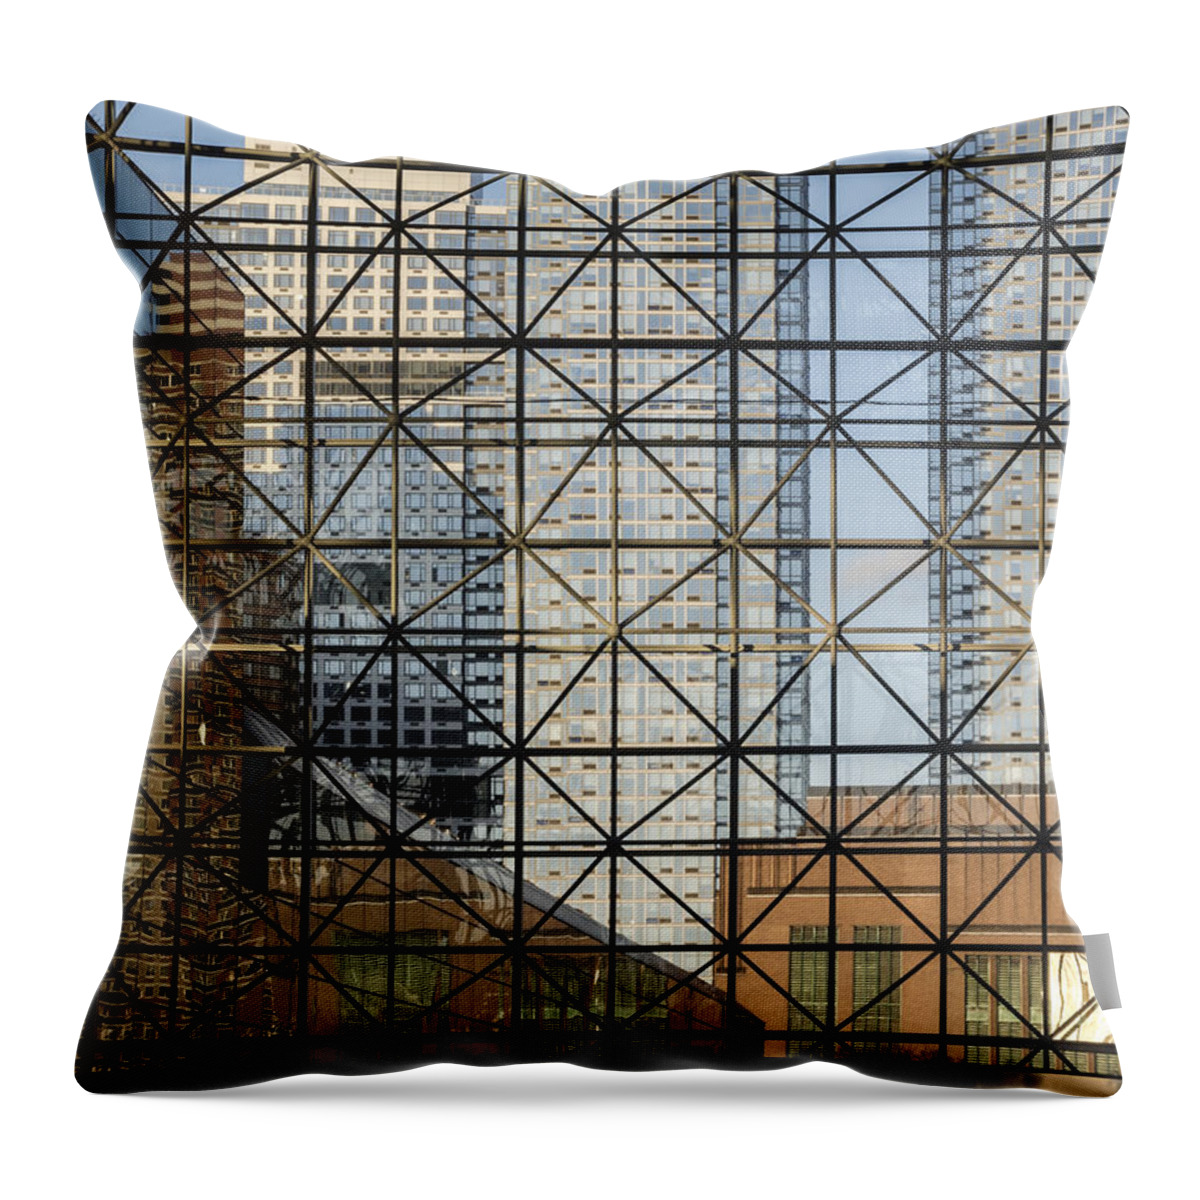 America Throw Pillow featuring the photograph City Windows Abstract by Marianne Campolongo